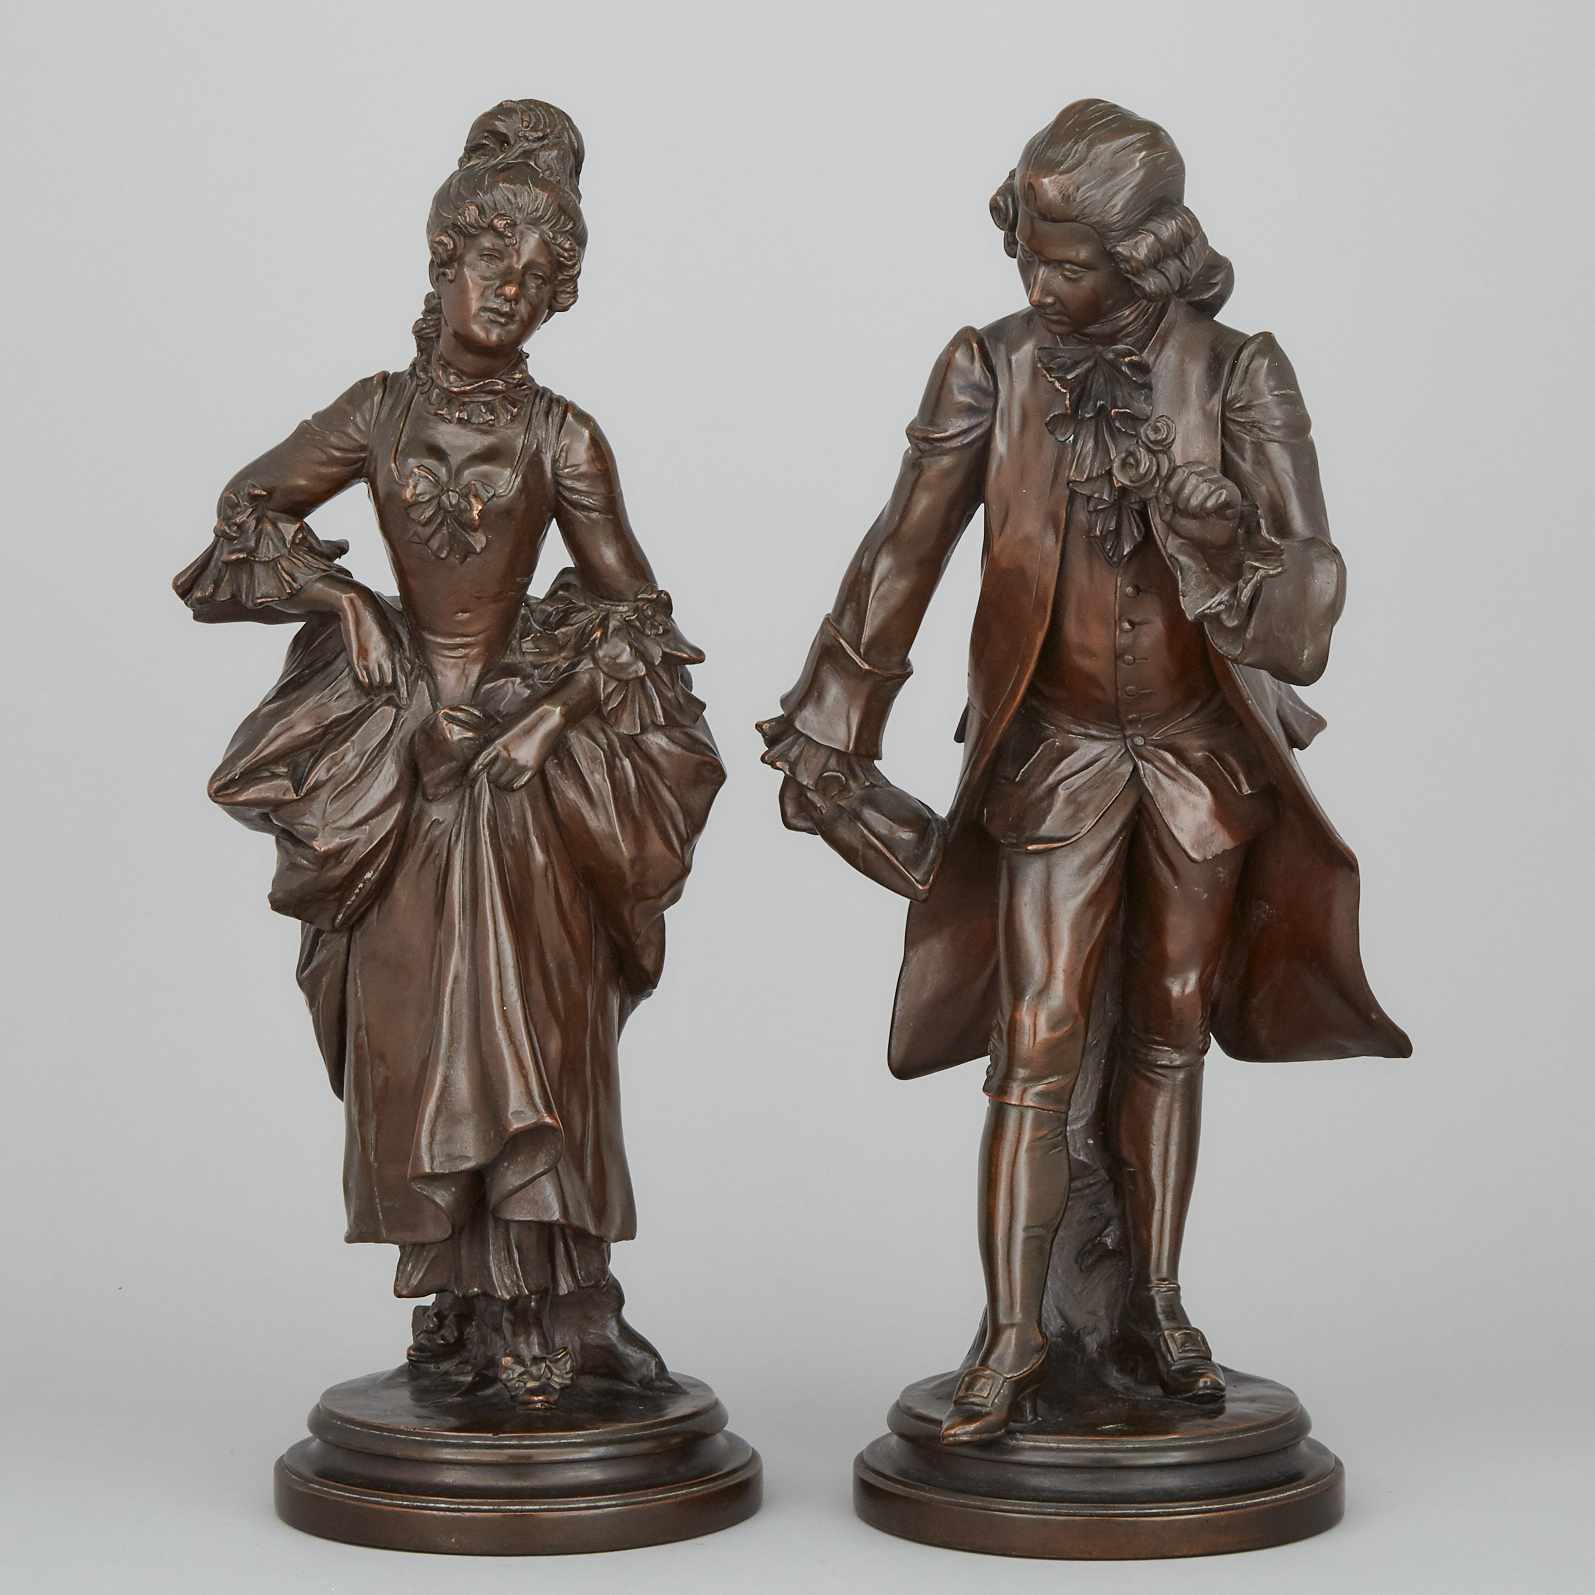 Pair of French School Figures of Courtiers, 19th century